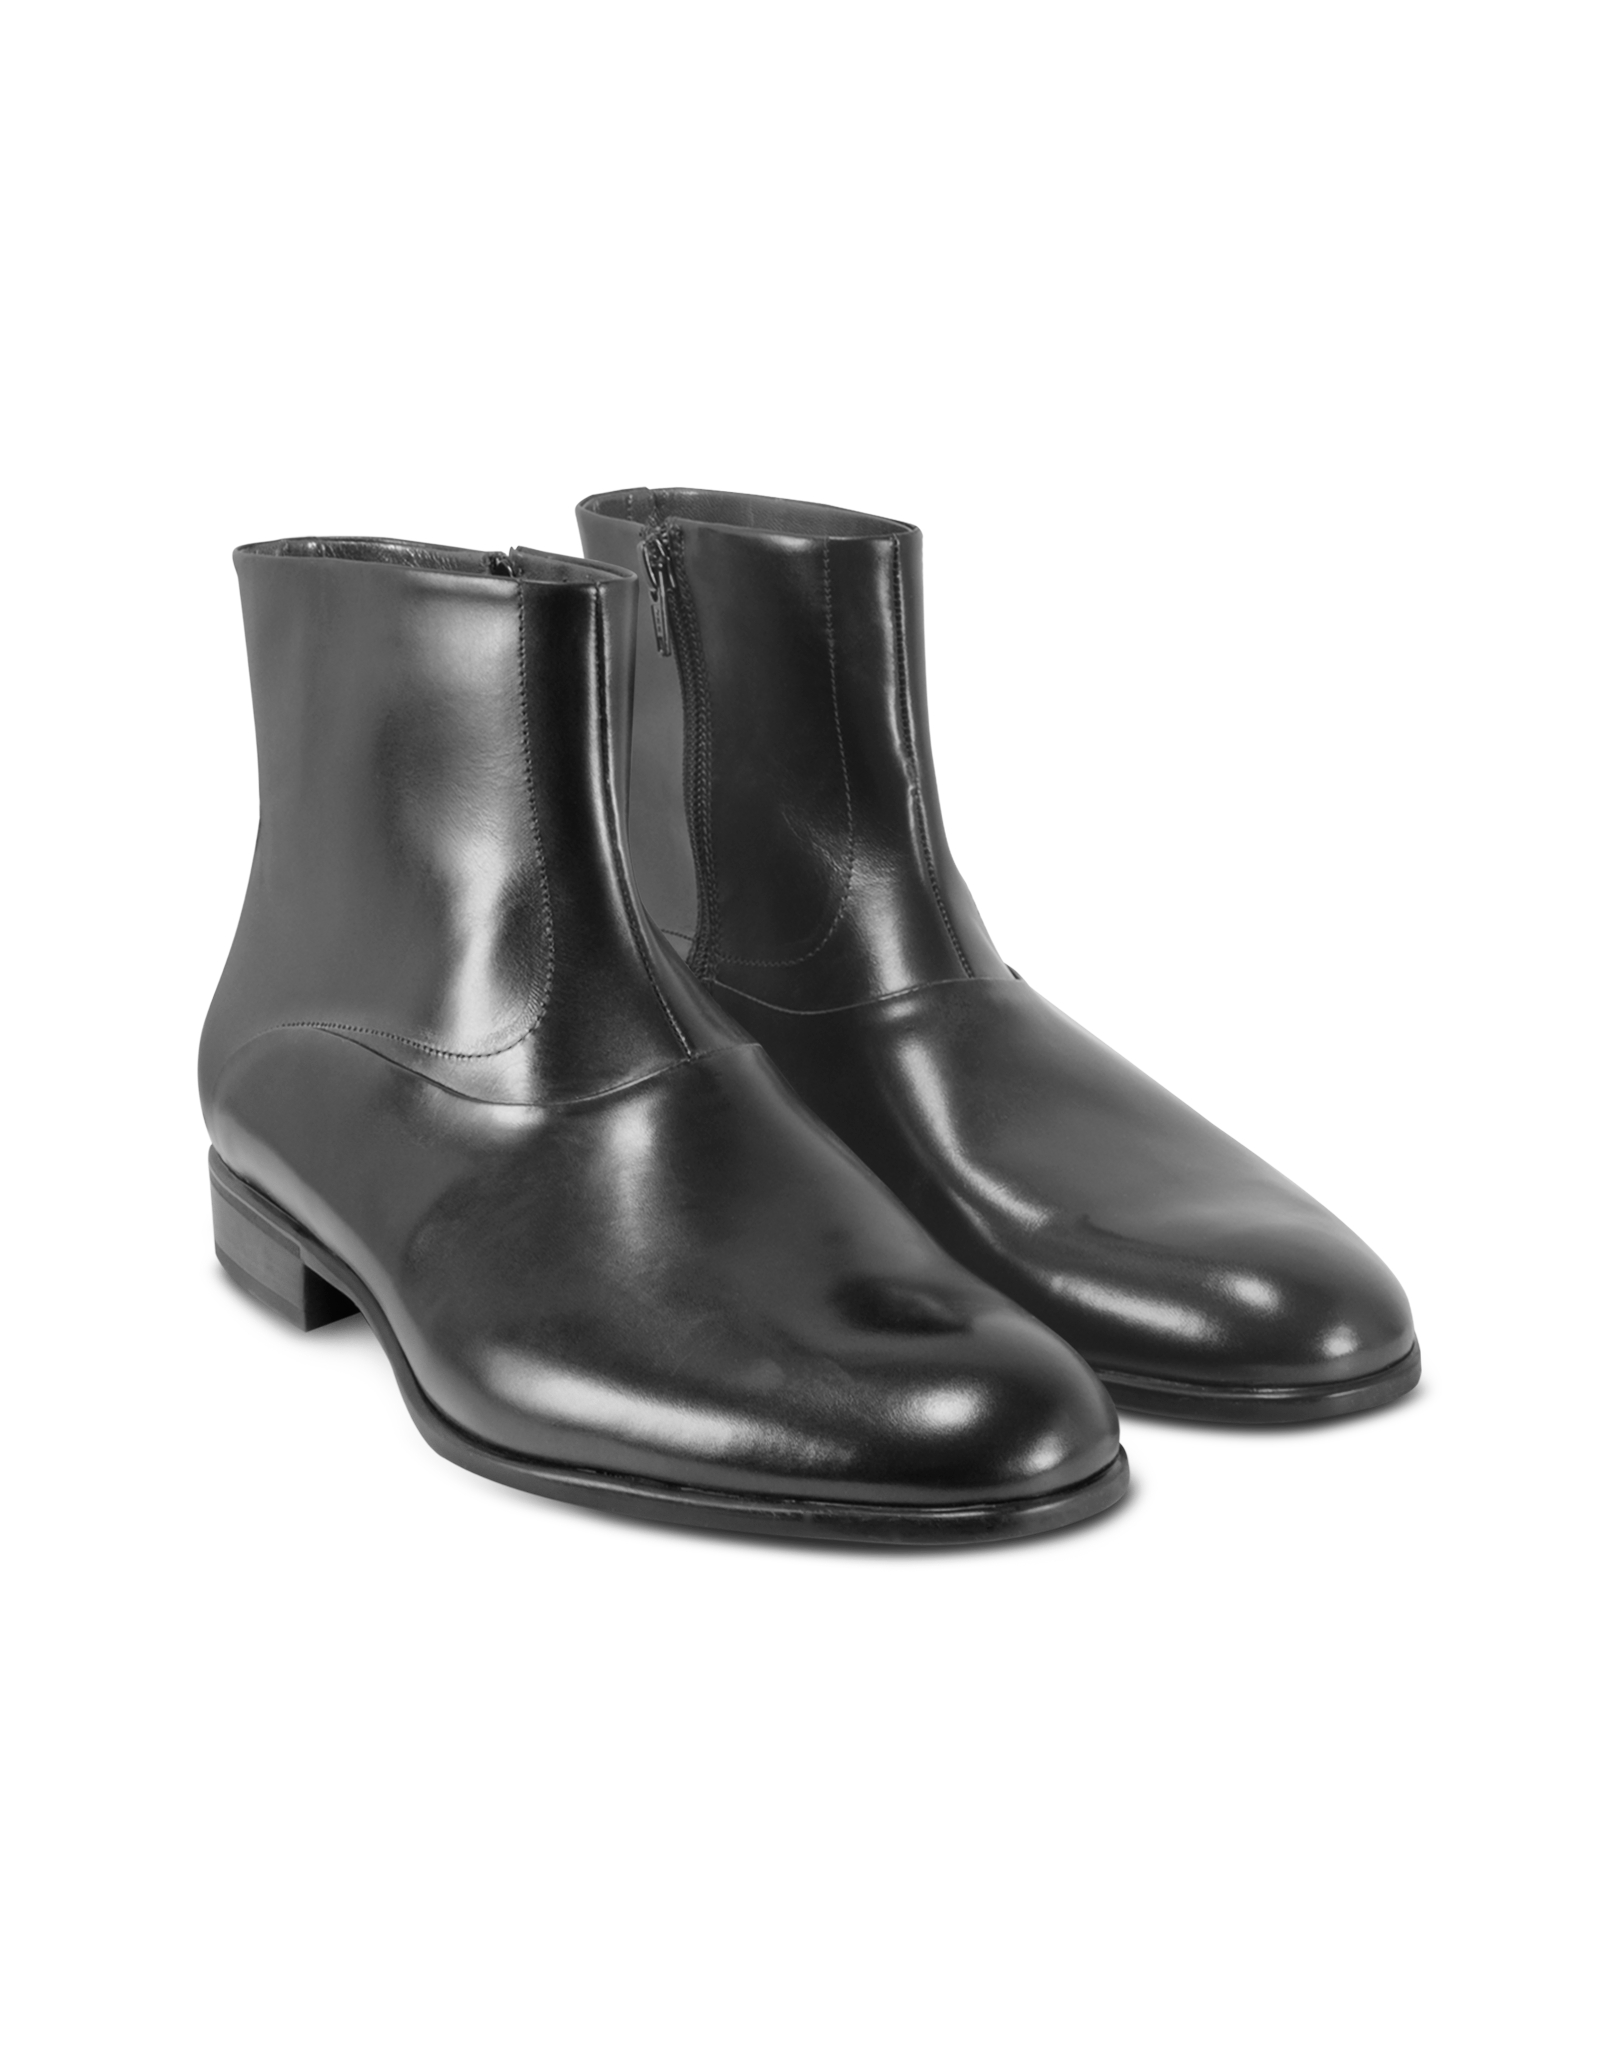 Lyst - Moreschi Istanbul Black Leather Ankle Boots in Black for Men